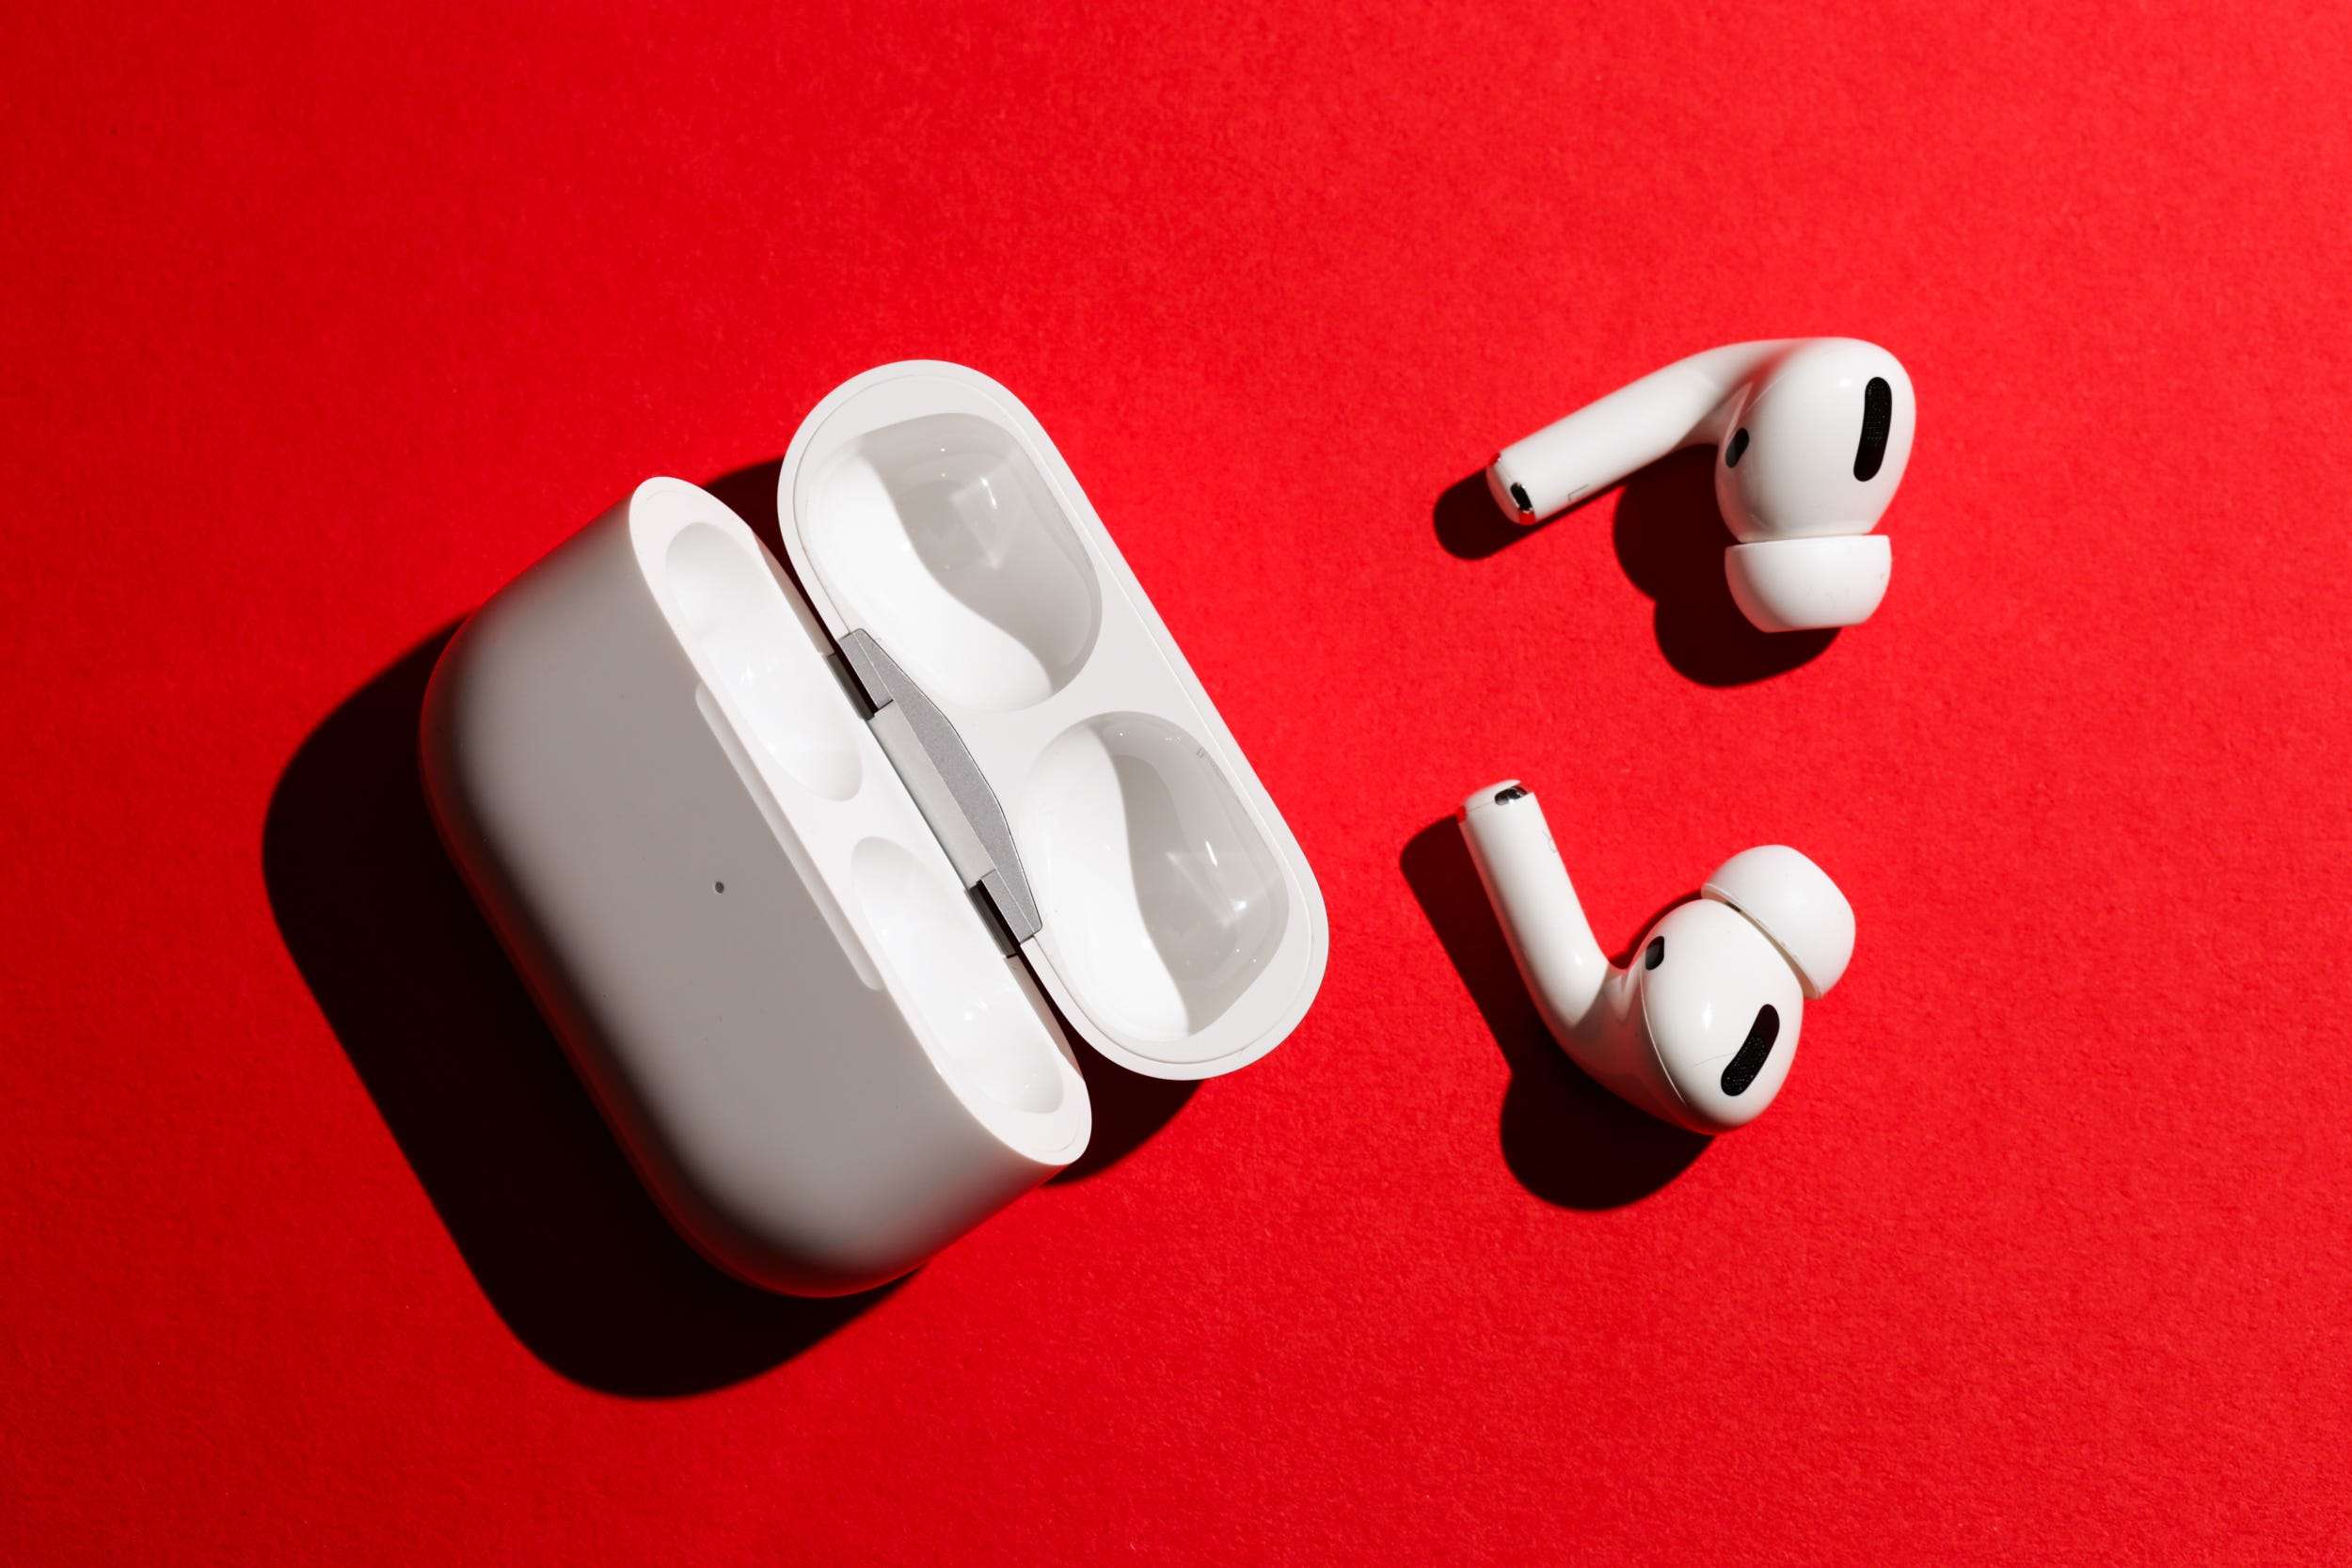 How to connect AirPods to a PS4 for wireless audio ...